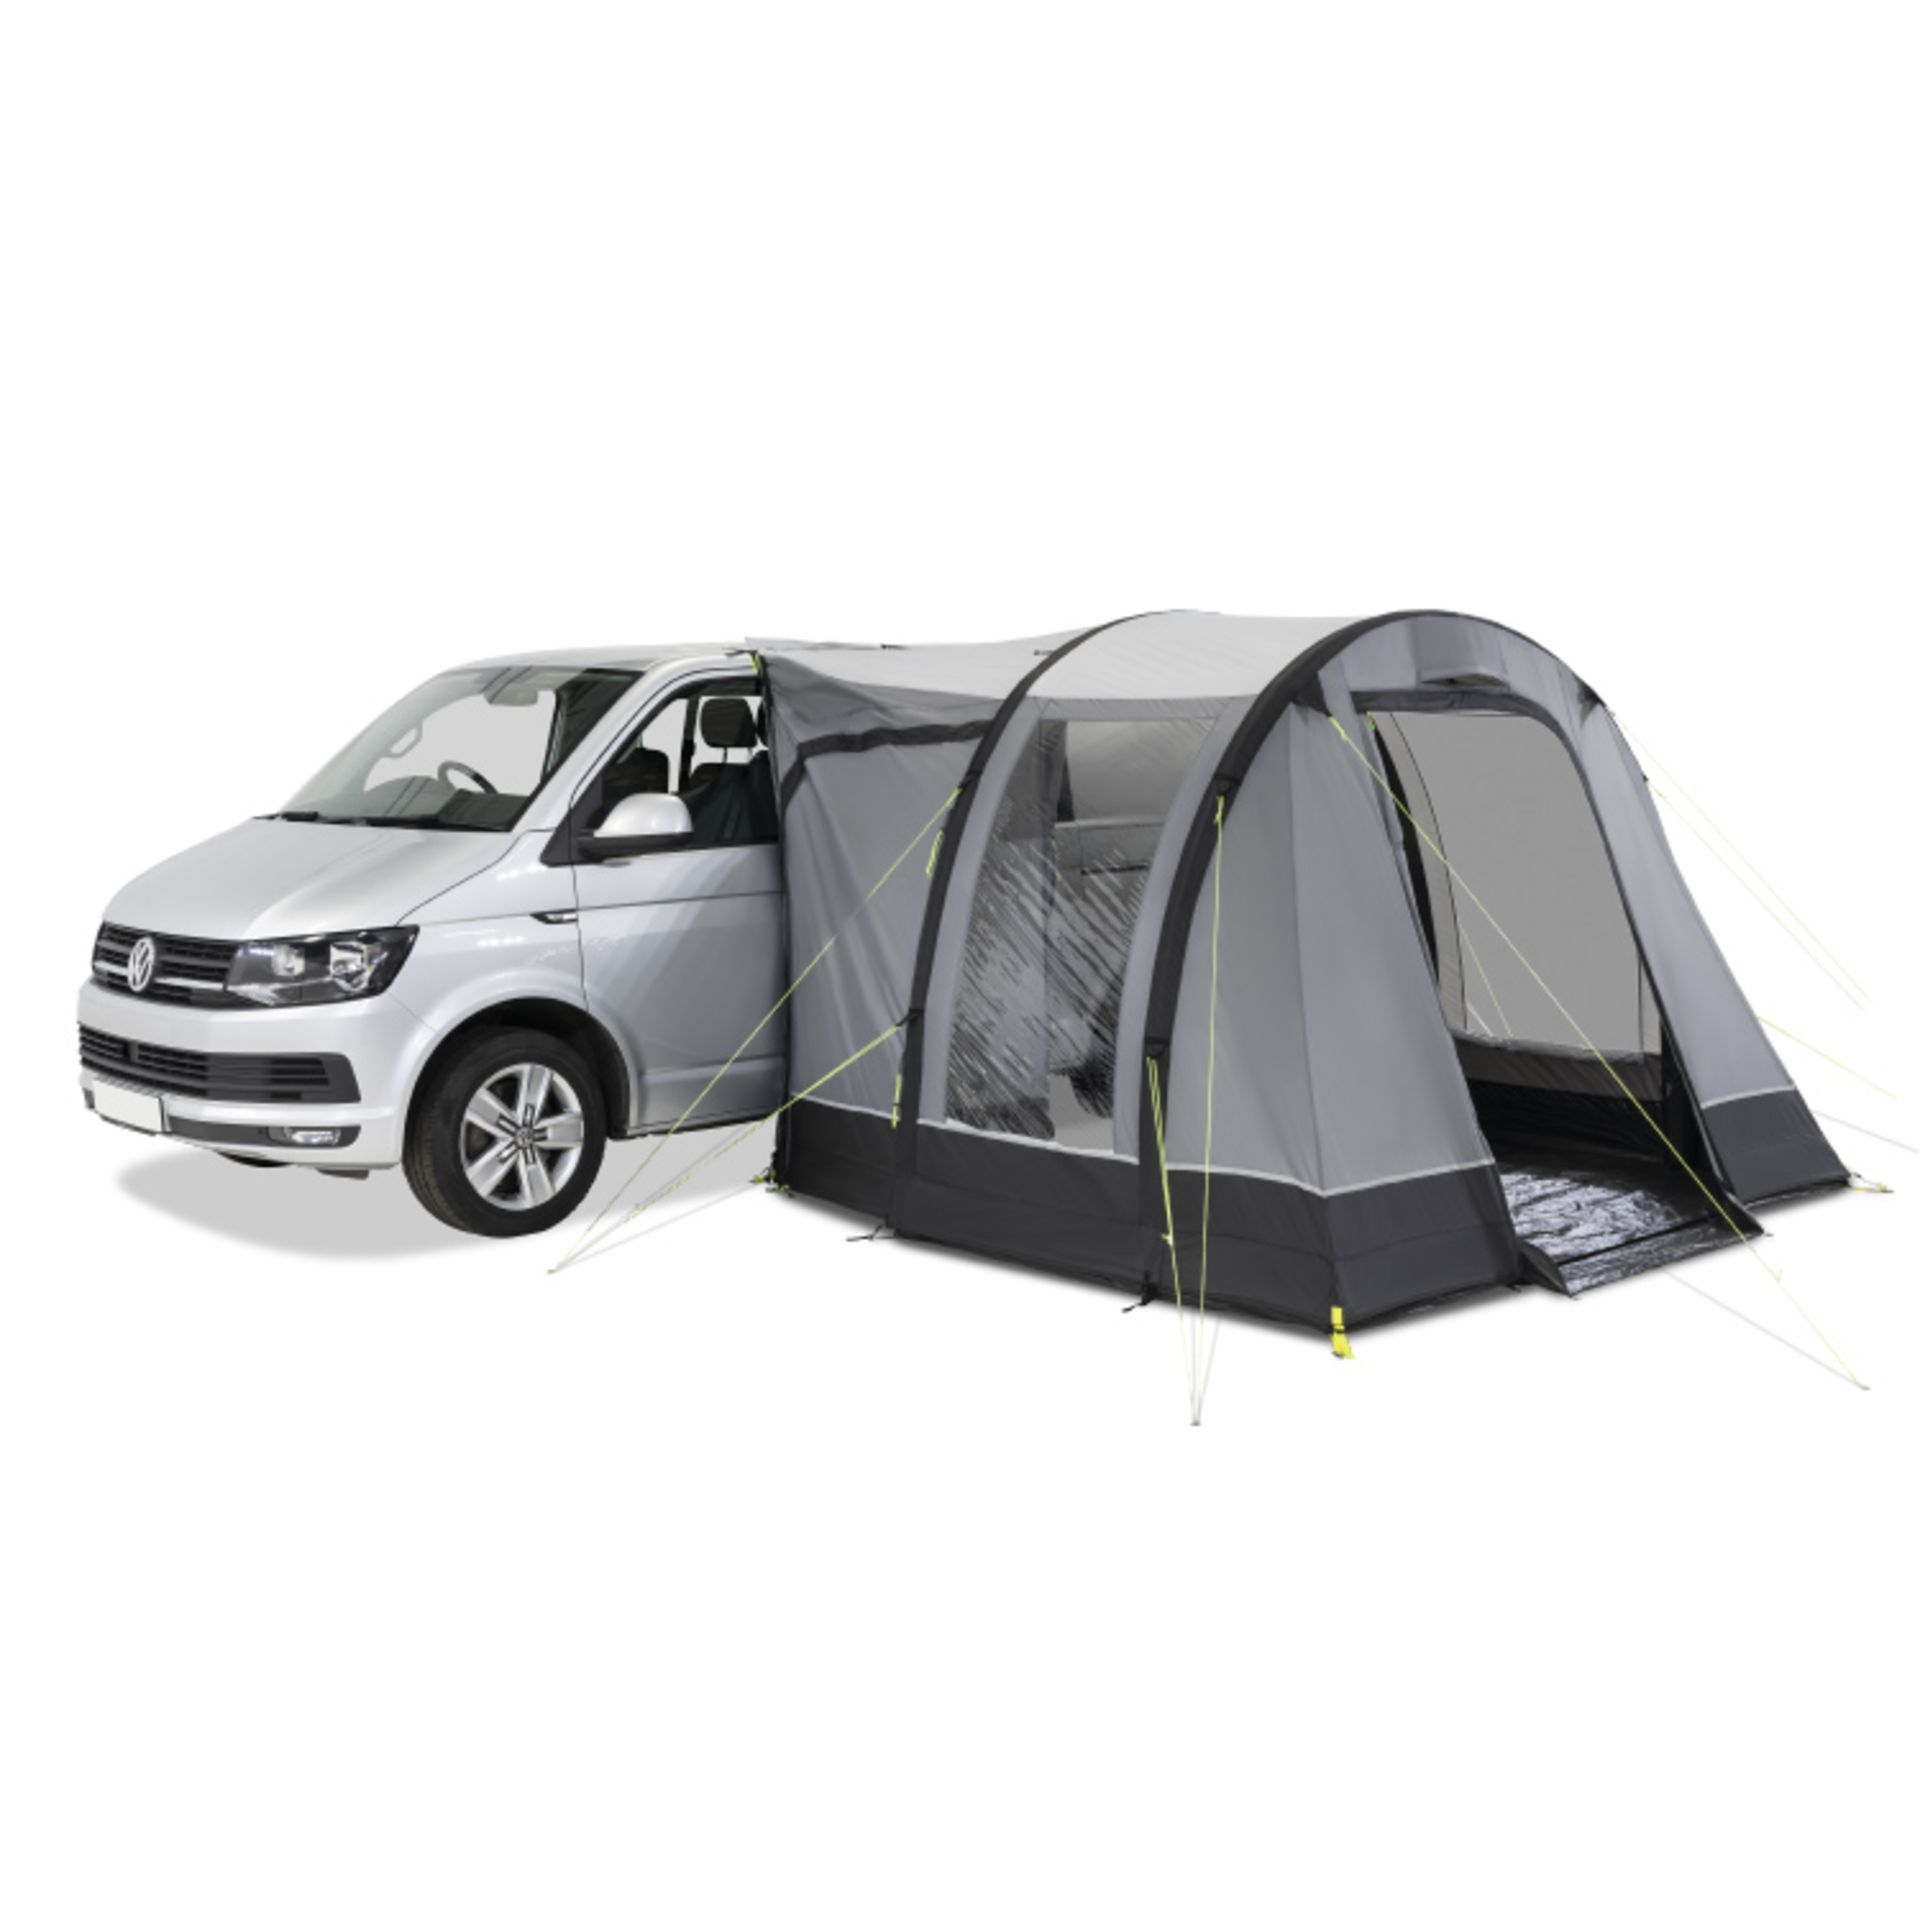 Kampa Trip AIR Drive Away Awning - This practical drive away vehicle awning fits vehicles within